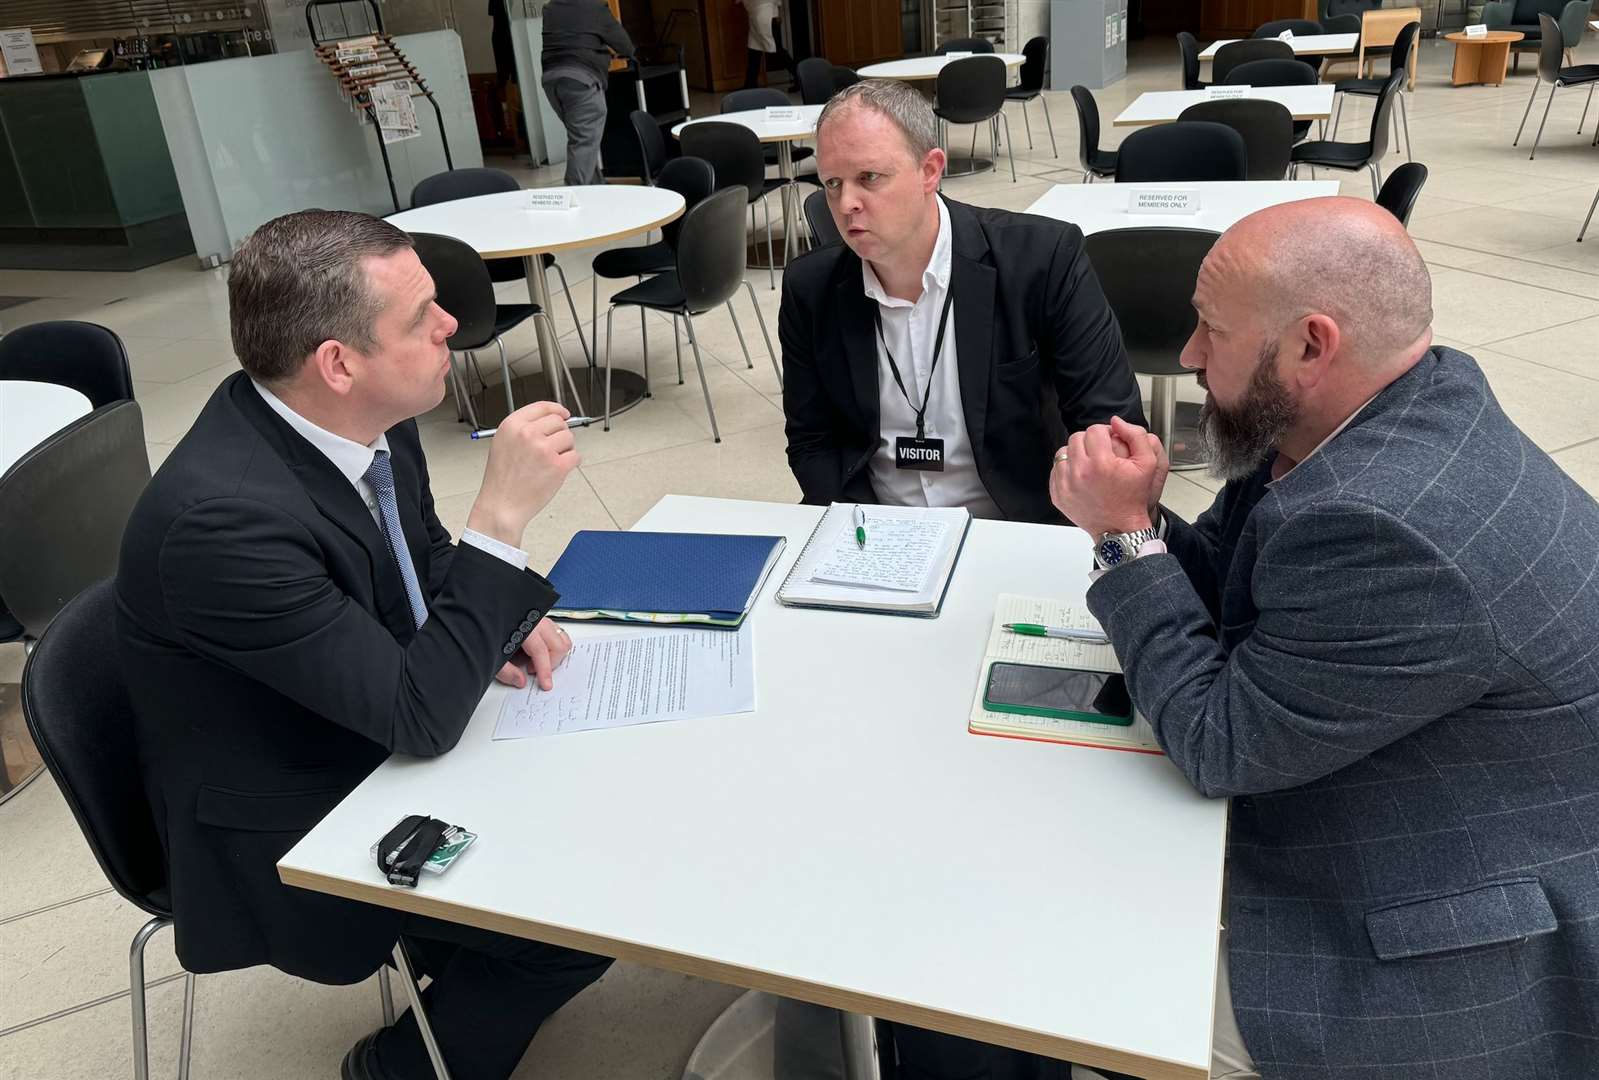 Douglas Ross MP (left) discusses the closure of the Buckie BoS branch with Neil Moore and Ross Gardner from the bank.